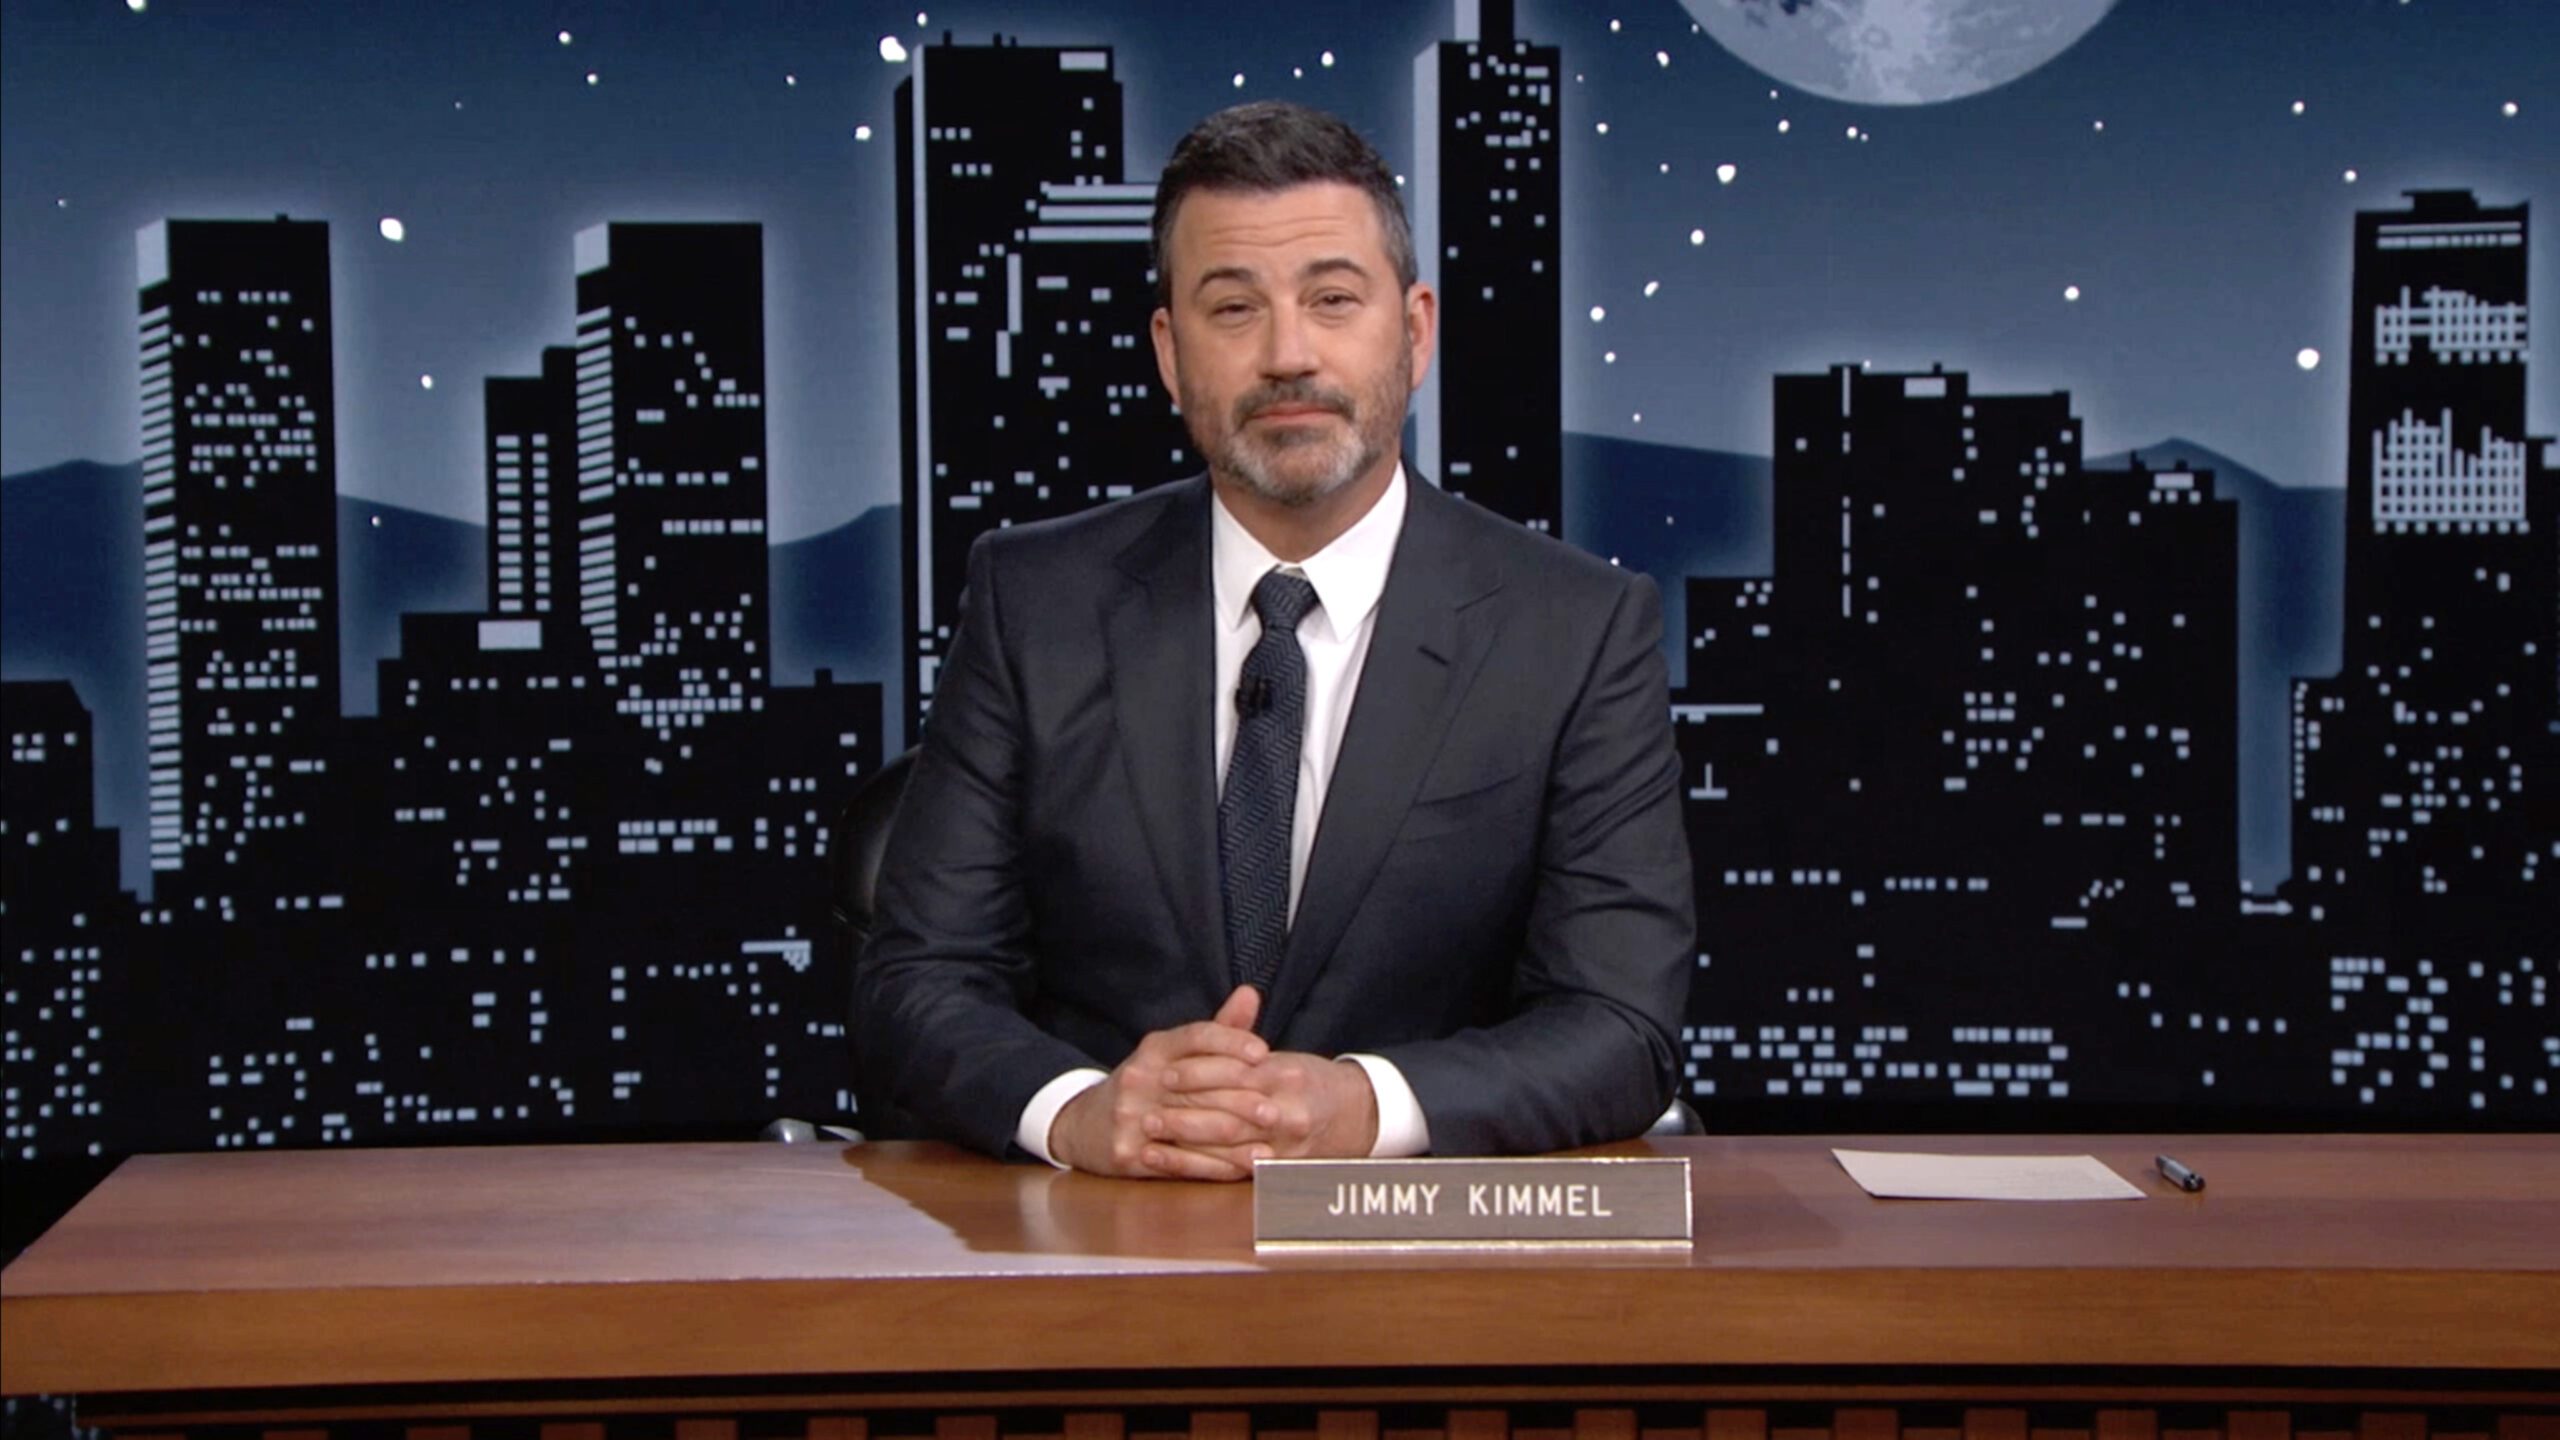 jimmy-kimmel-admits-he-lost-half-his-audience-for-bashing-trump-–-and-he’s-fine-with-that